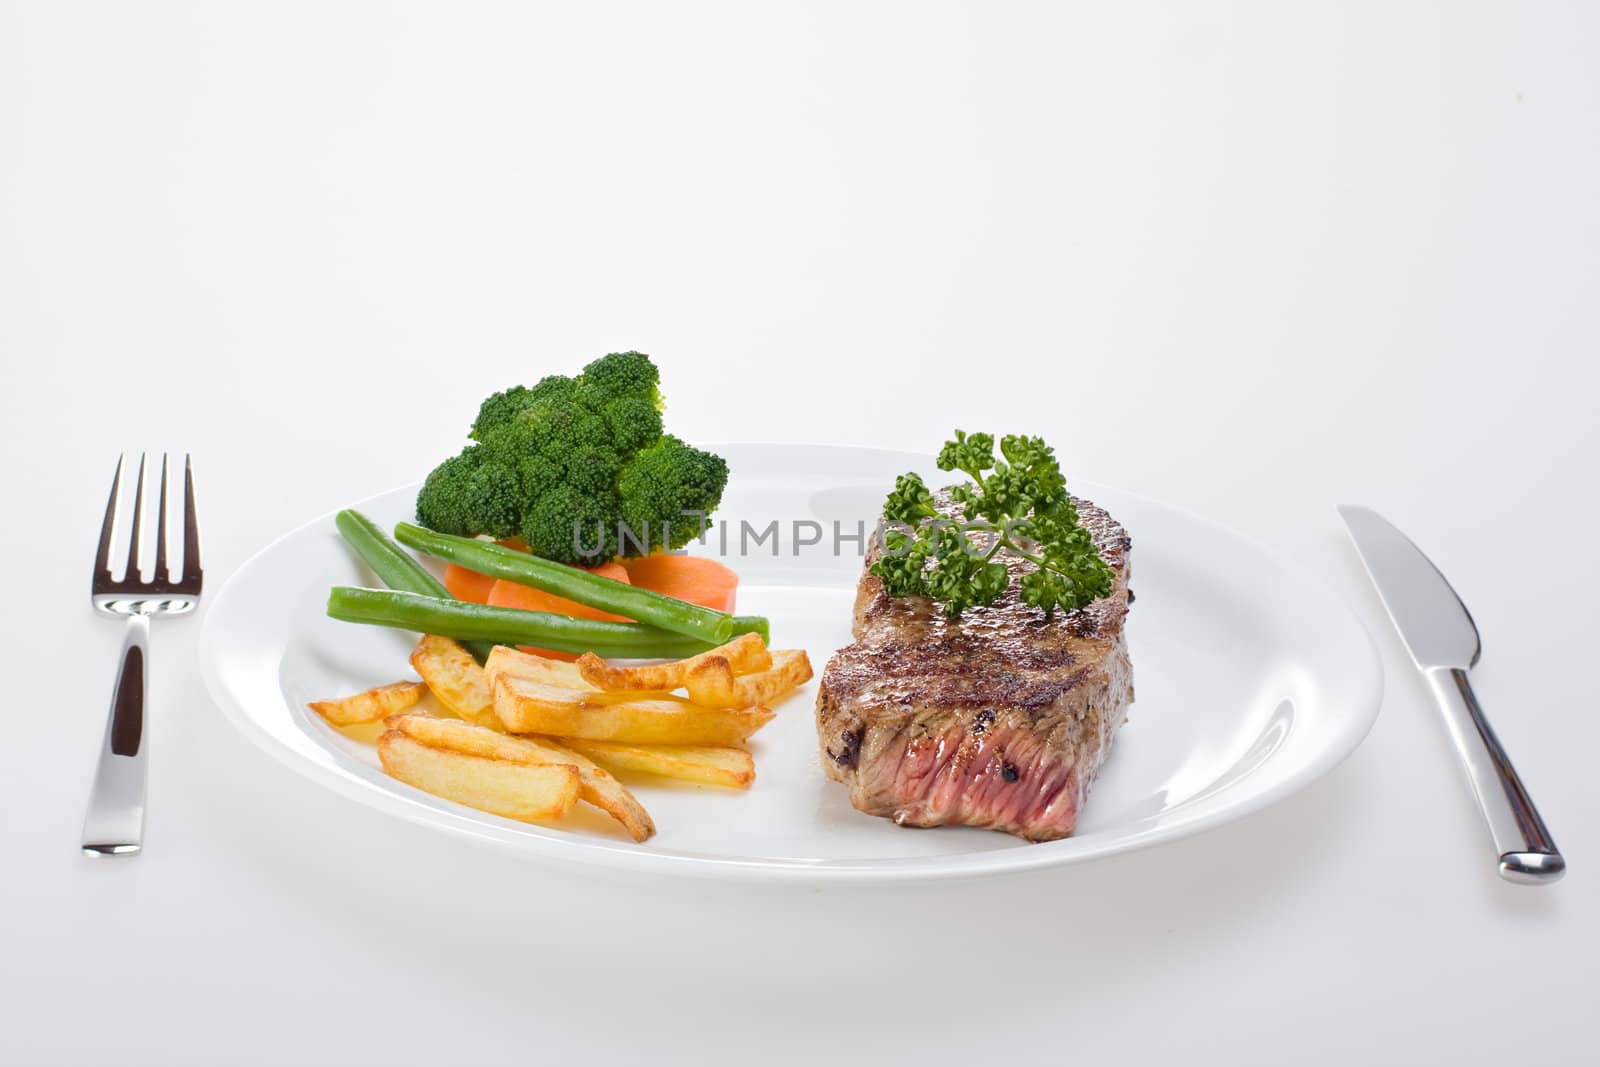 grilled steak on a plate with fries by bernjuer